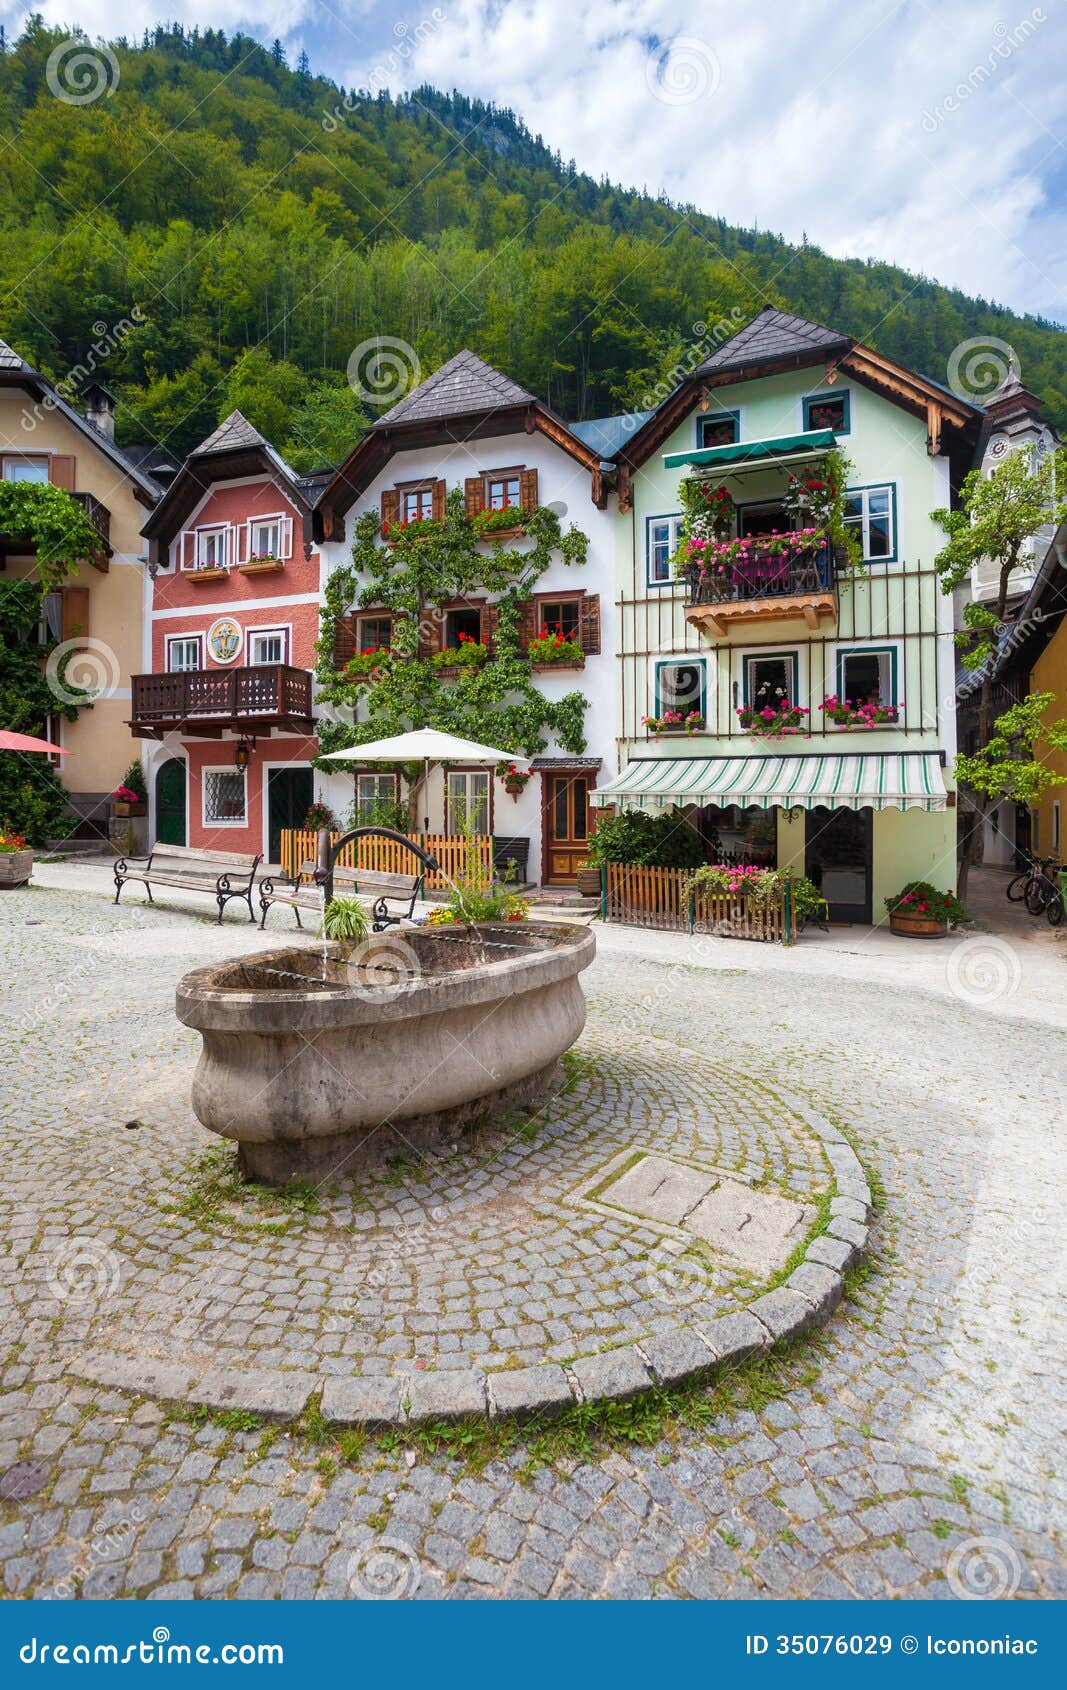 Colorful Houses Village Square In Hallstatt Royalty Free Stock ...